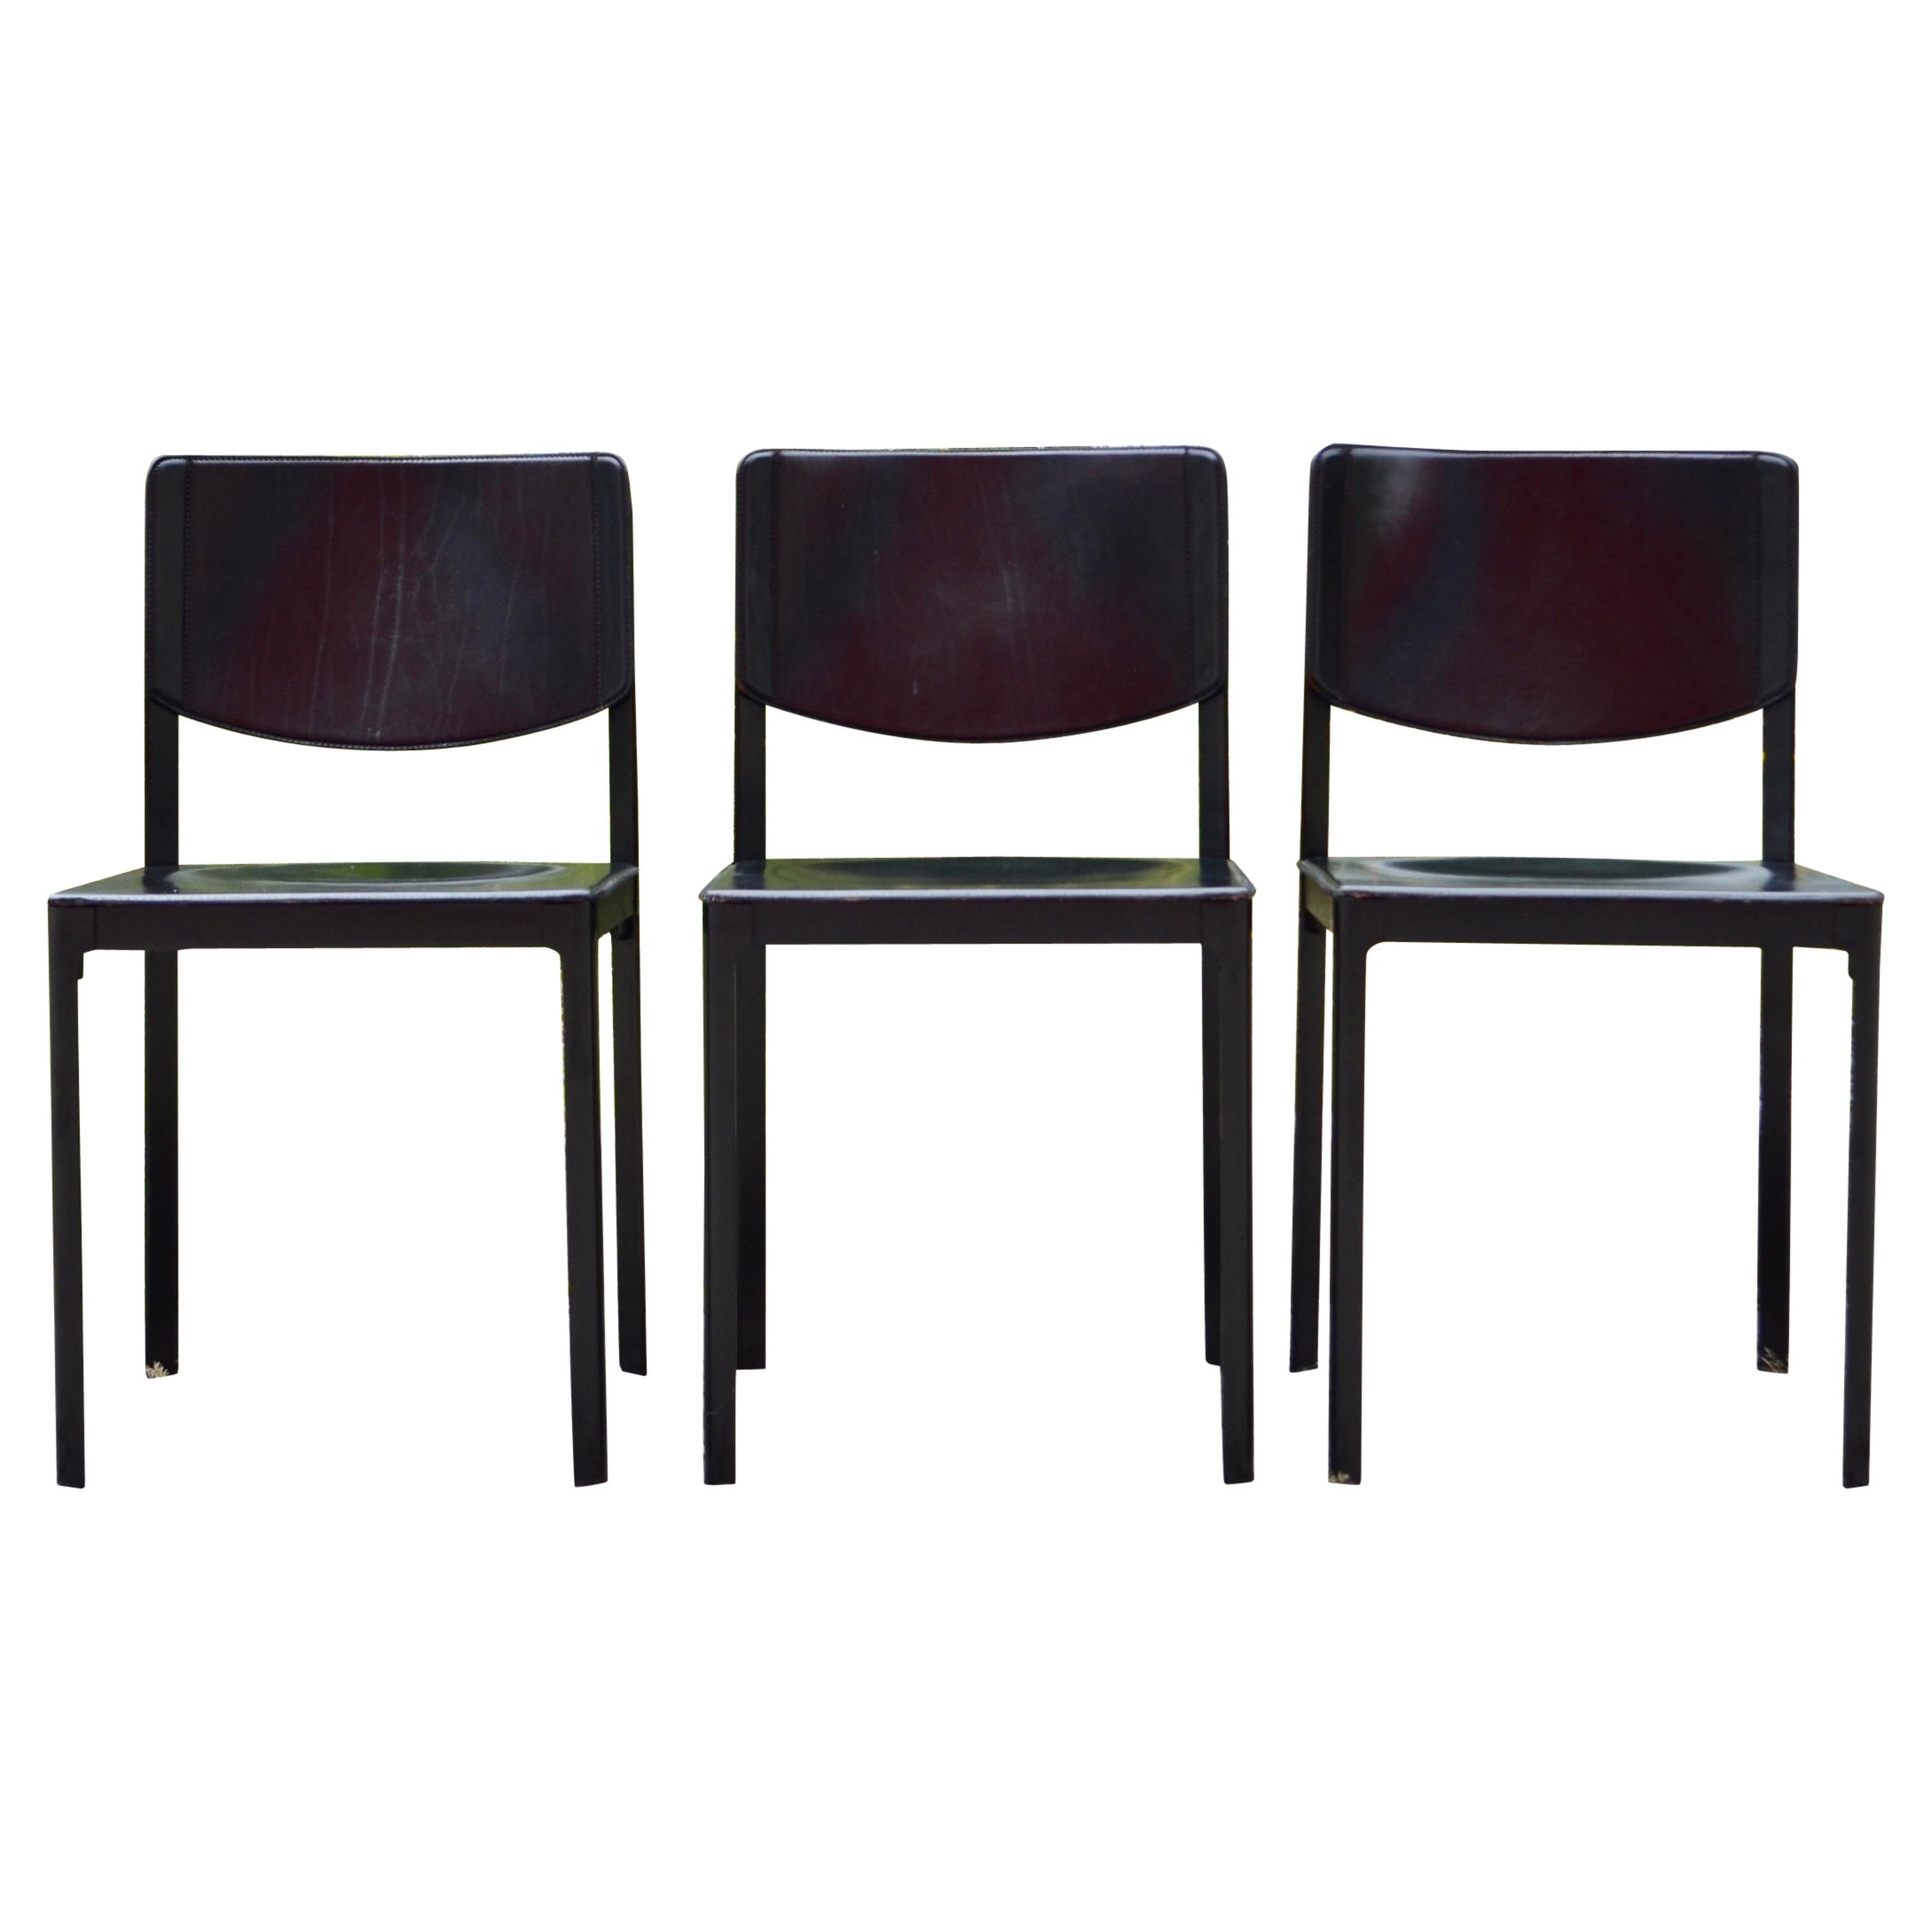 Tito Agnoli for Matteo Grassi Vintage Leather Dining Chair Set of 3